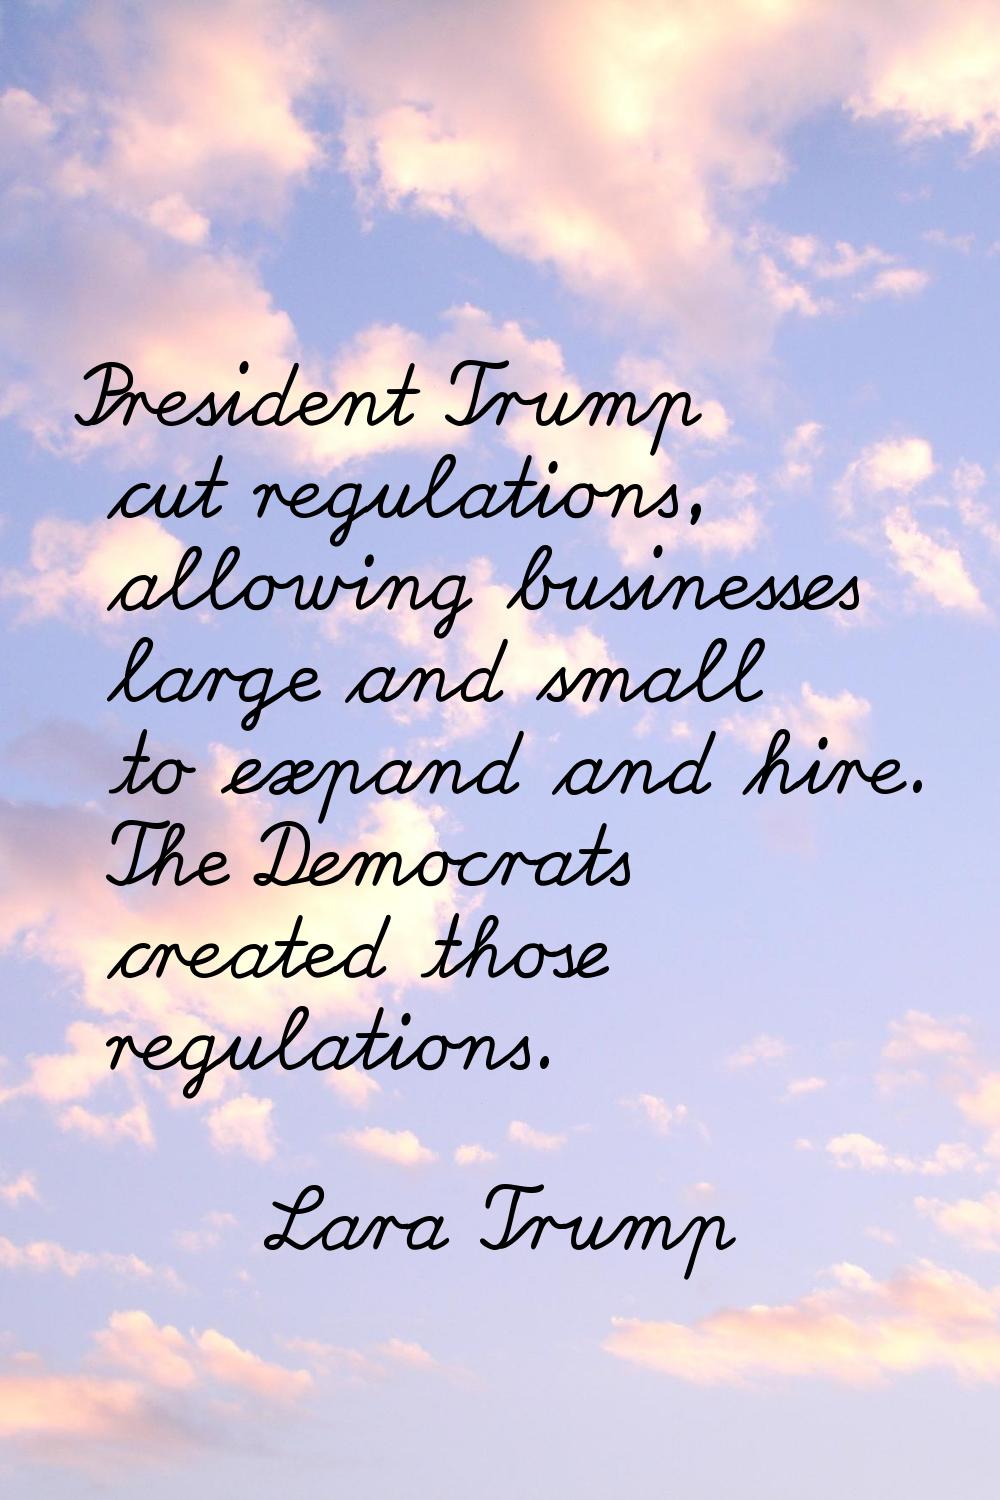 President Trump cut regulations, allowing businesses large and small to expand and hire. The Democr